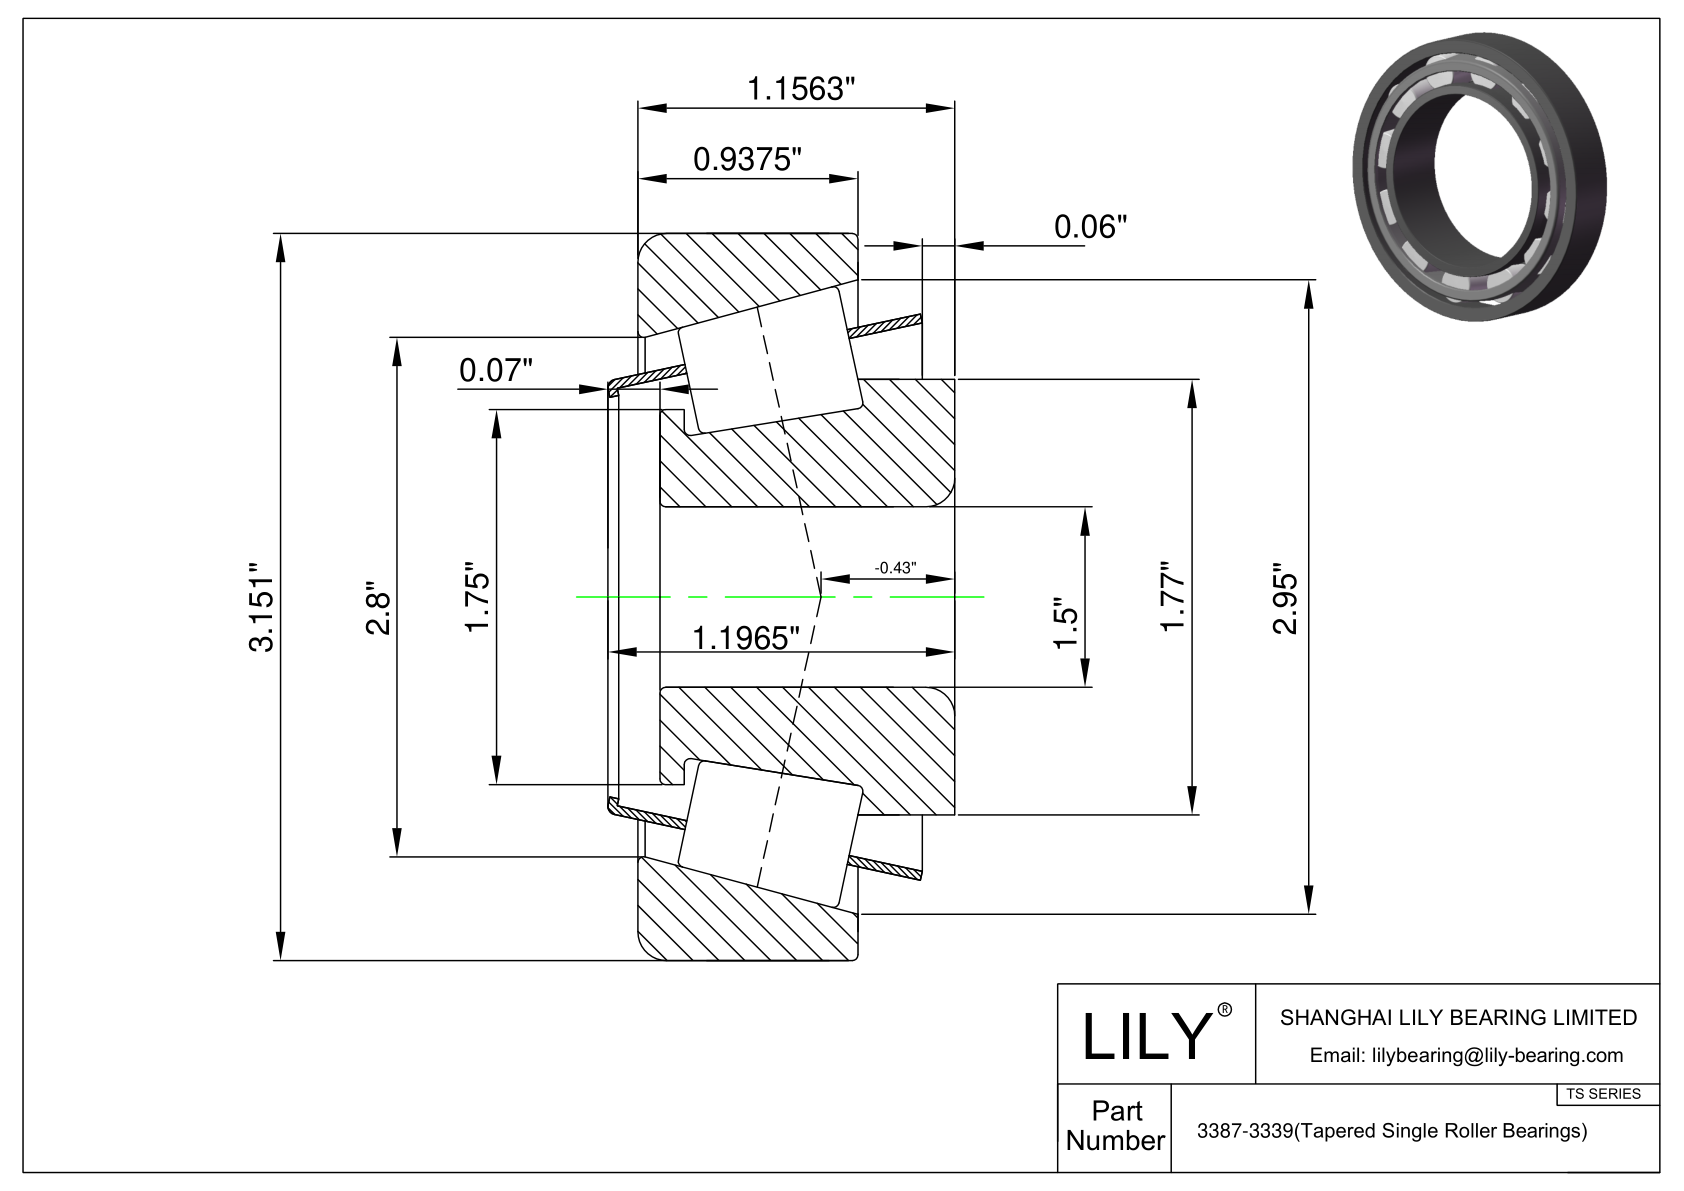 3387-3339 TS (Tapered Single Roller Bearings) (Imperial) cad drawing